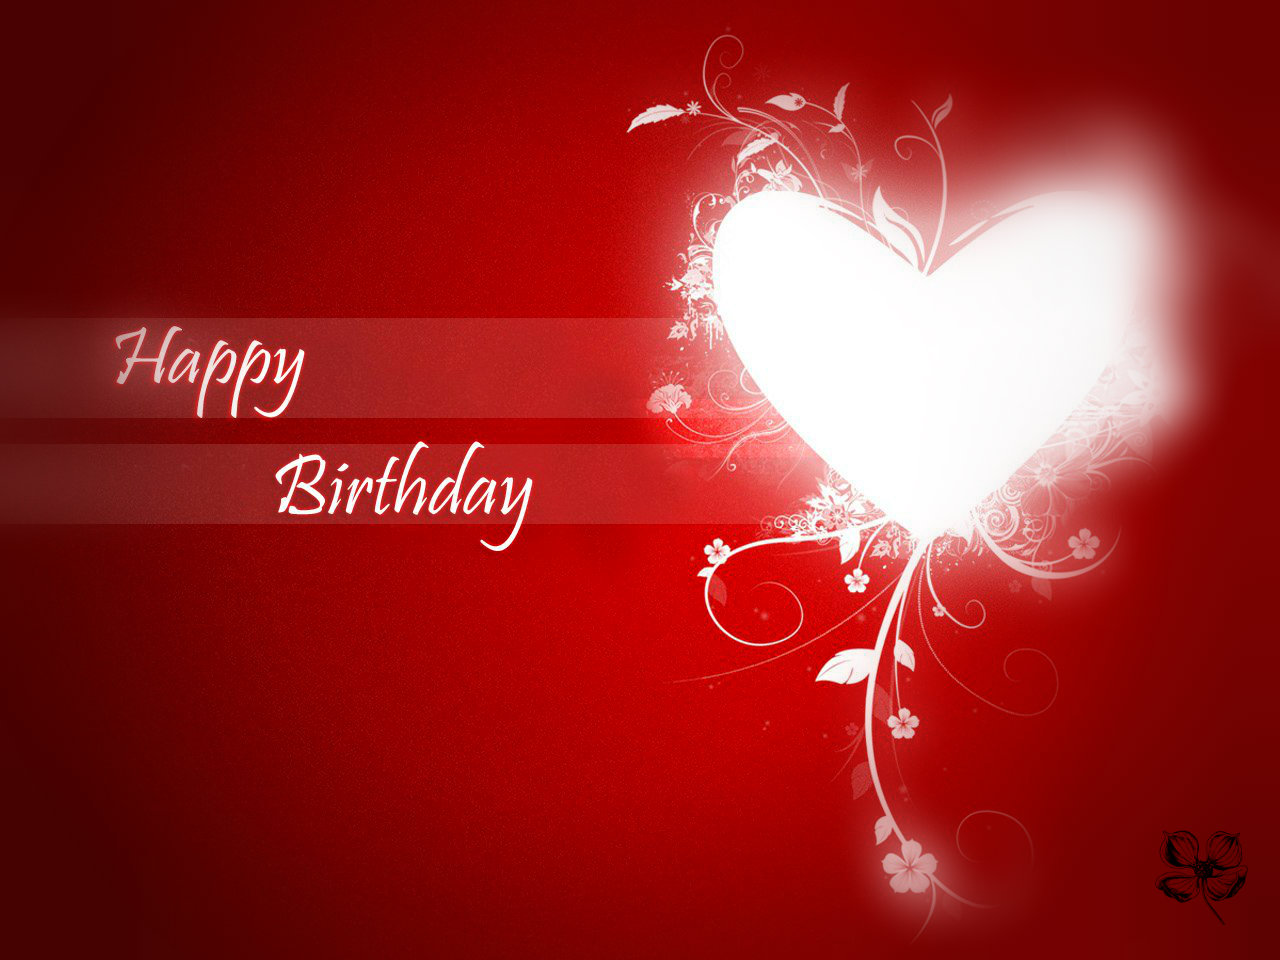 Happy Birthday Hd Wallpaper Free Download - Birthday Image For Lover , HD Wallpaper & Backgrounds